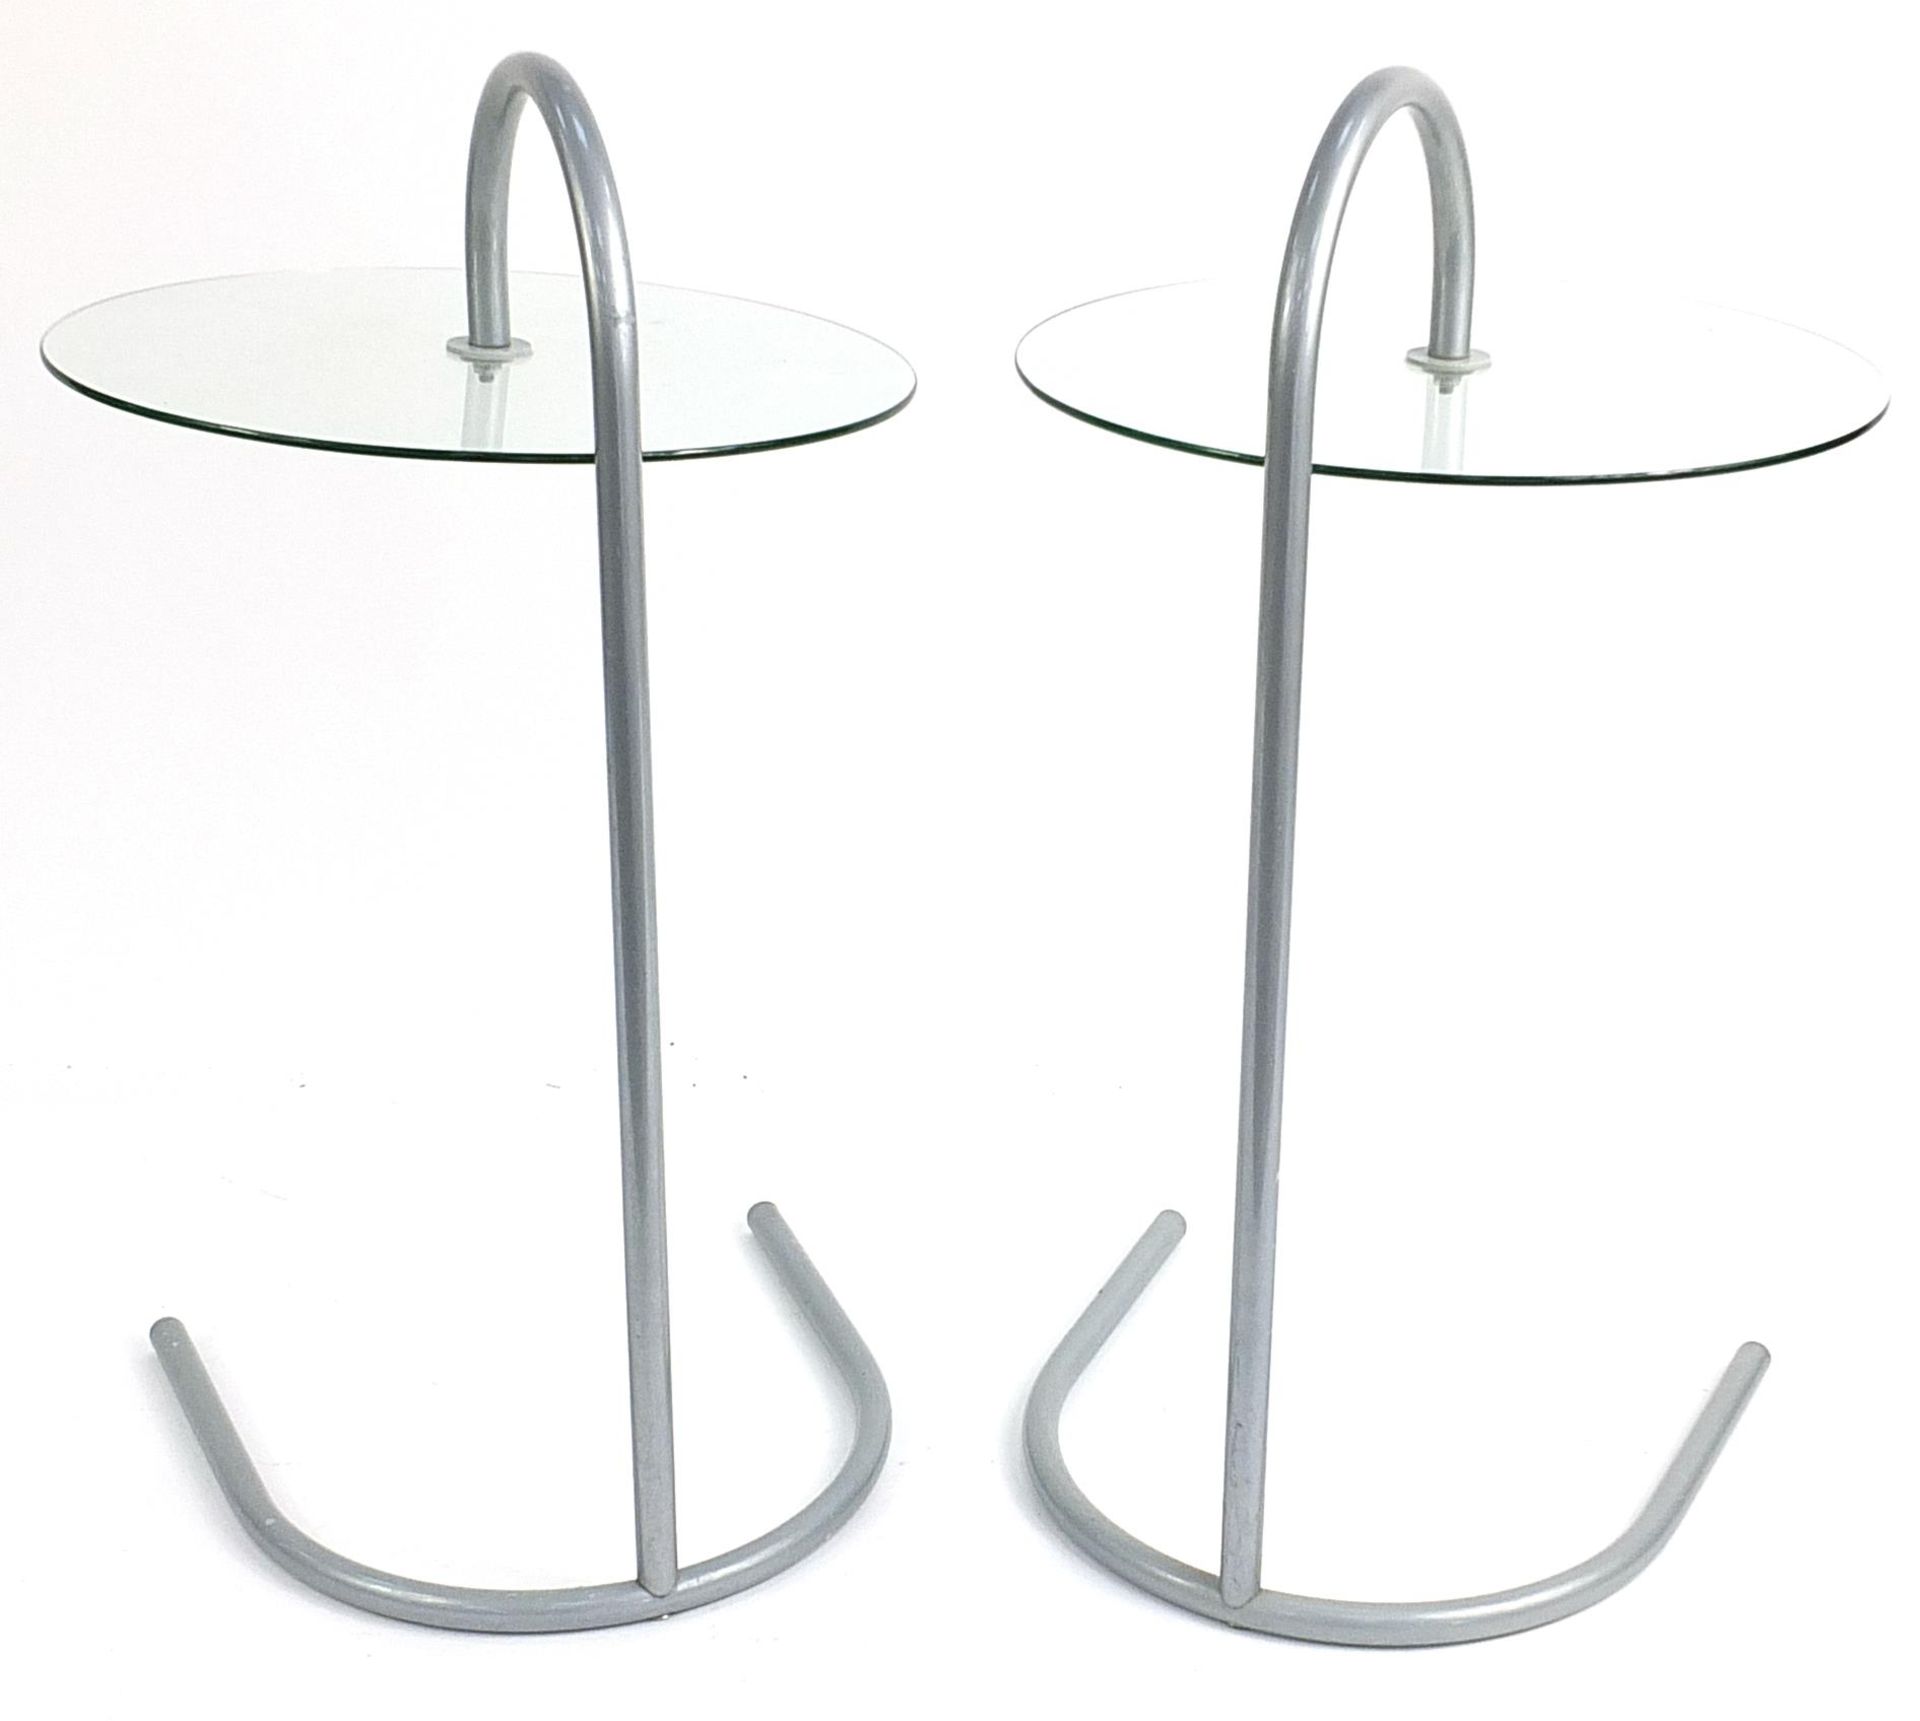 Pair of silver metal stylish circular glass side tables, each 72cm - Image 2 of 2